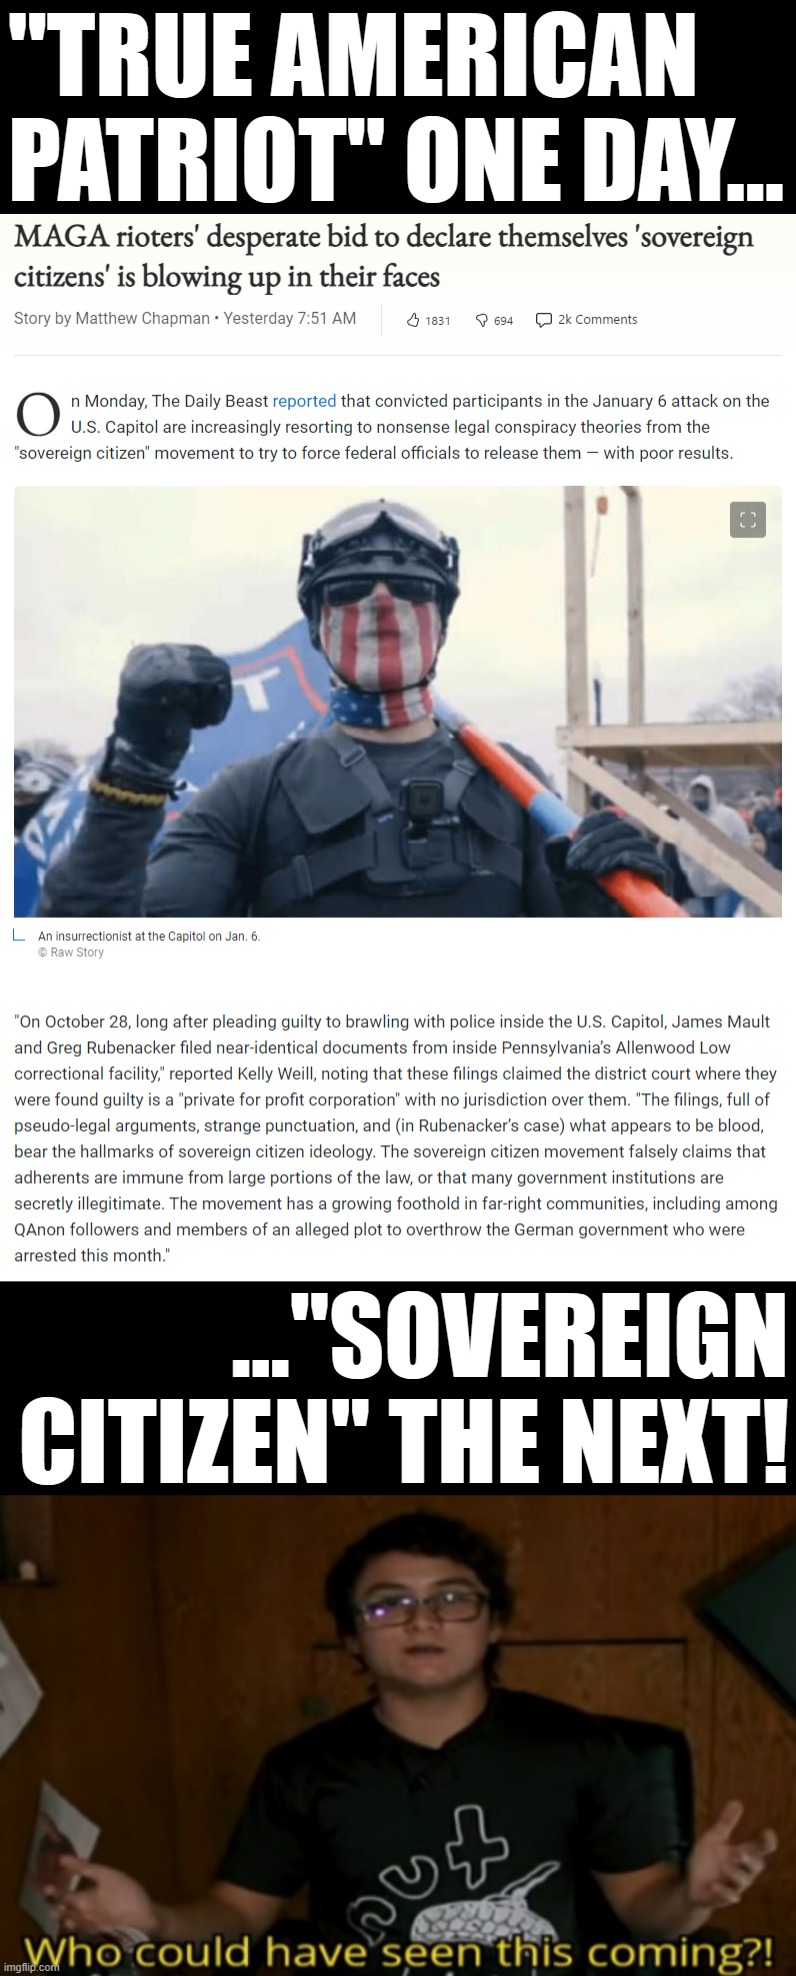 Disclaiming any association with the United States in a doomed bid to evade the consequences of their actions? That's so weird | "TRUE AMERICAN PATRIOT" ONE DAY... ..."SOVEREIGN CITIZEN" THE NEXT! | image tagged in who could have seen this coming,jan 6,conservative hypocrisy,sovereign citizen,traitors,treason | made w/ Imgflip meme maker